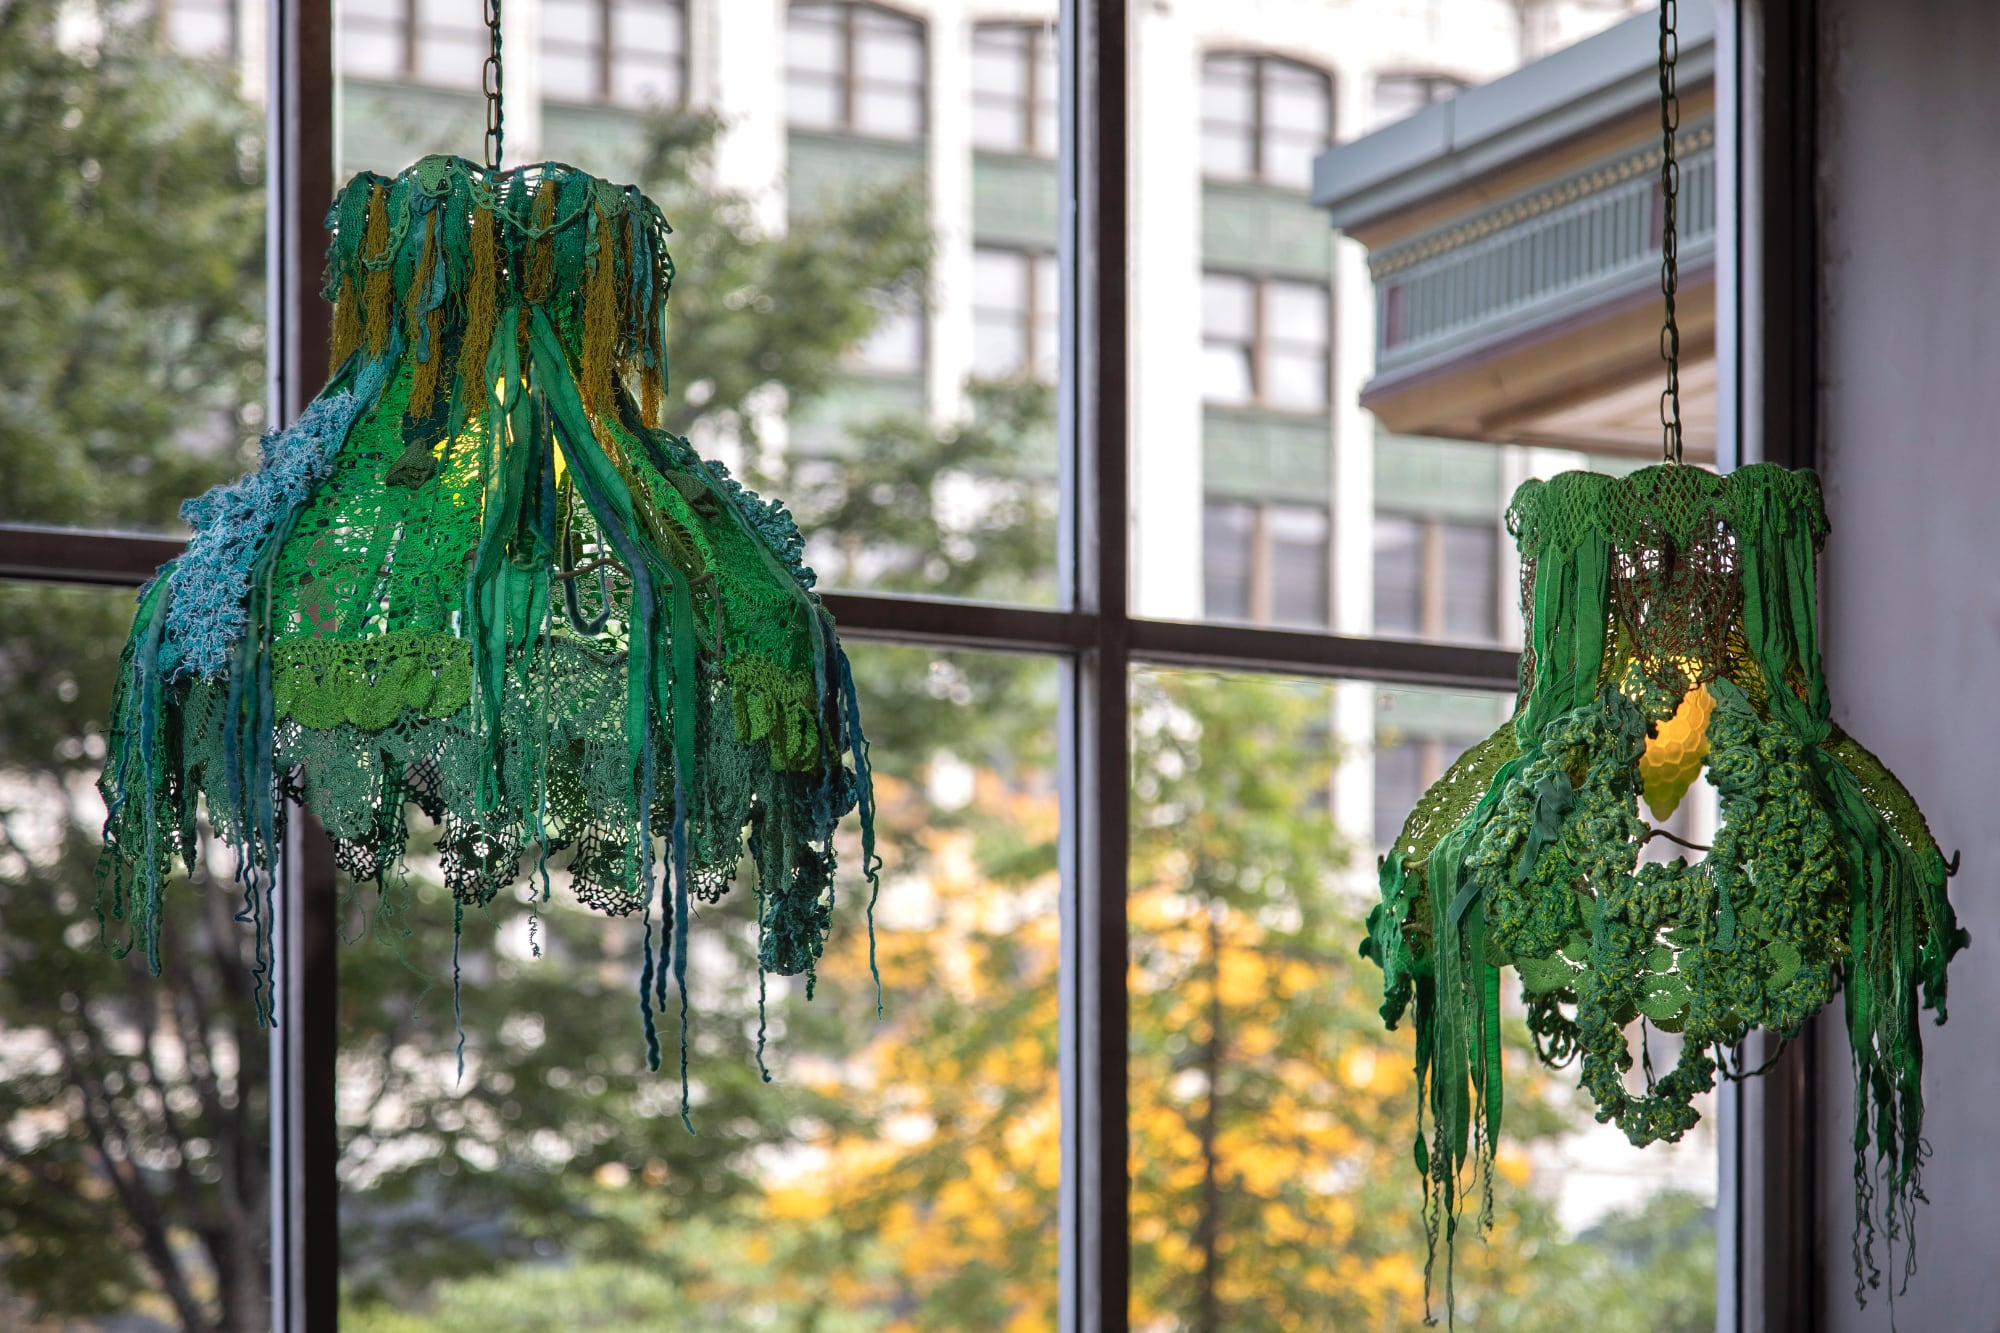 two pendant lights covered in green crochet hang in front of a window